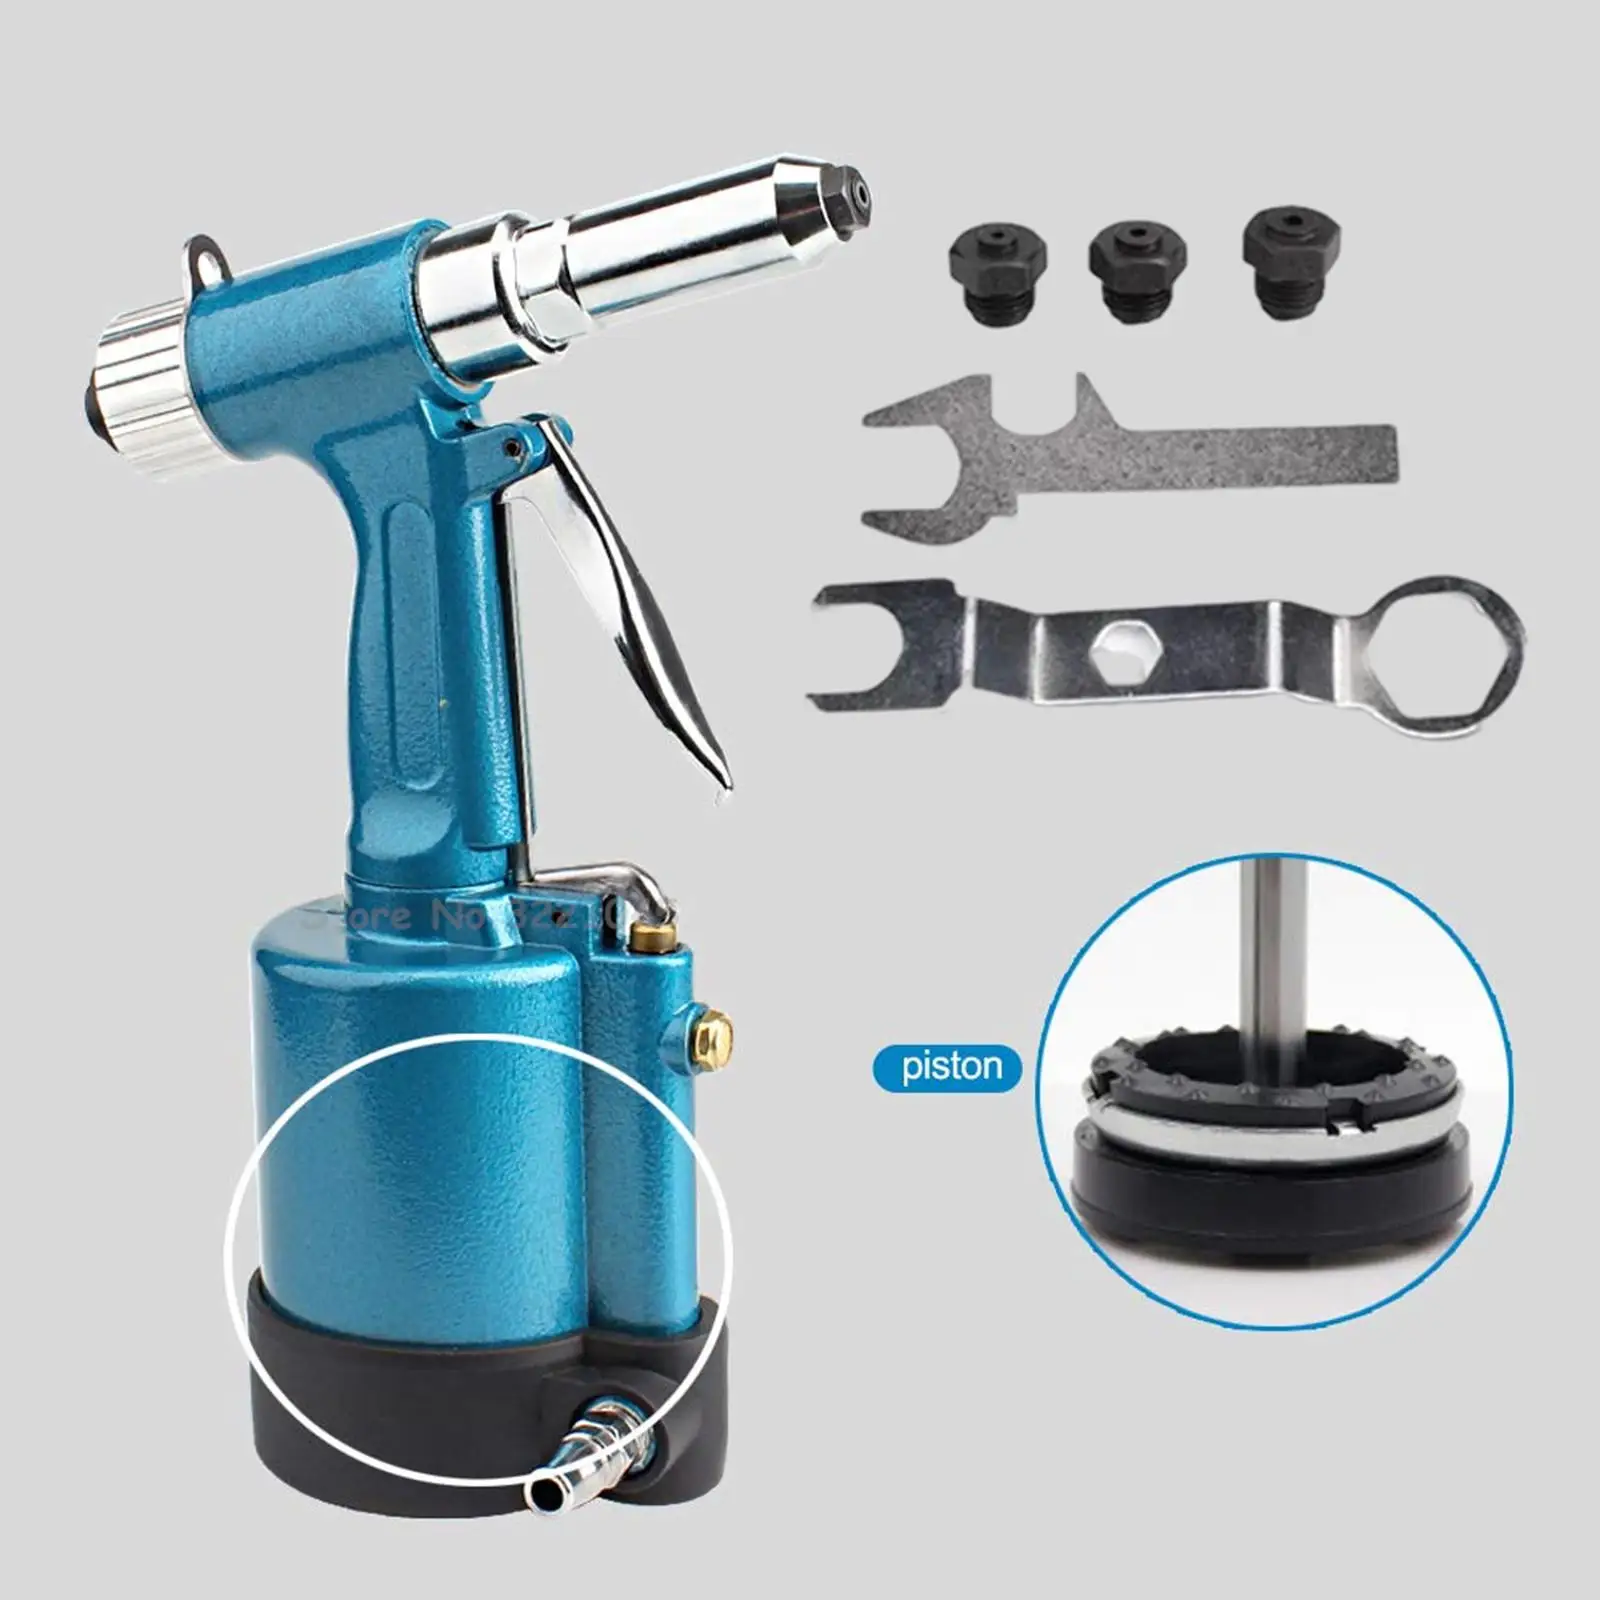 Lightweight Pneumatic Rivet Kit with Nose Wrench Air Riviting Set Tool Heavy Duty Hydraulic Air Riveter for DIY Projects